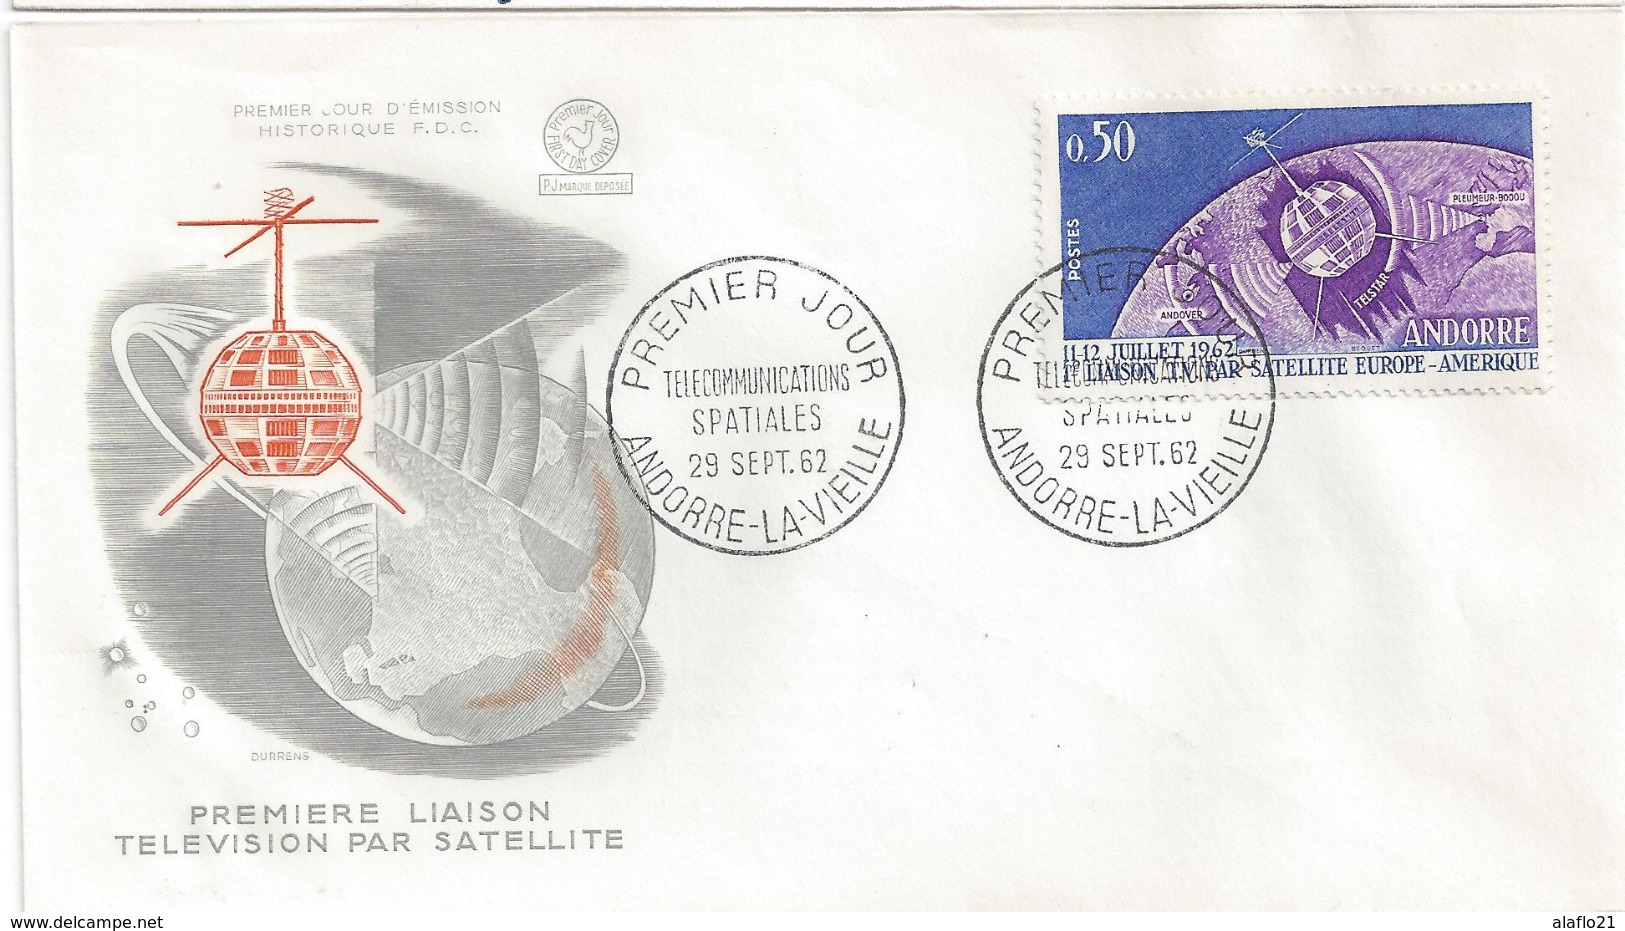 ANDORRE - ENVELOPPE 1er JOUR FDC - N° 165 - TELECOMMUNICATIONS SPATIALES - FDC